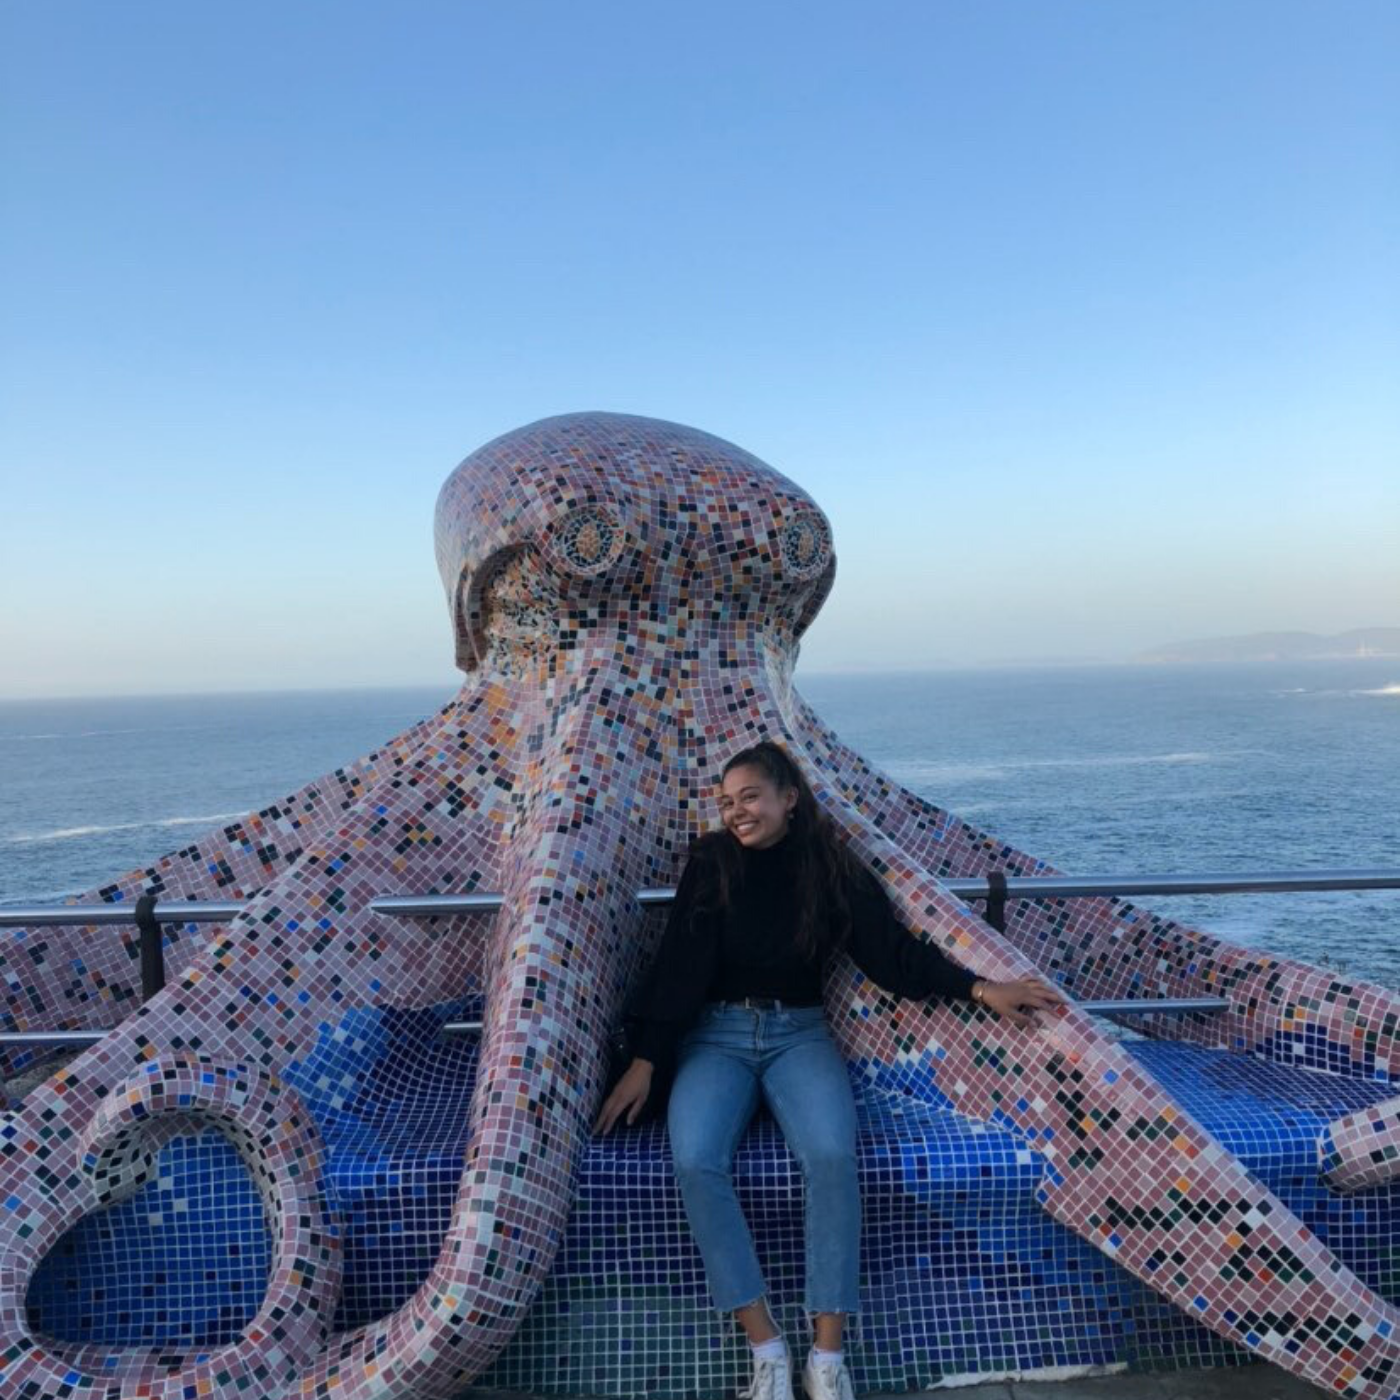 Fulbright recipient Sabrina Boutselis poses in front of Octopus sculpture in Spain